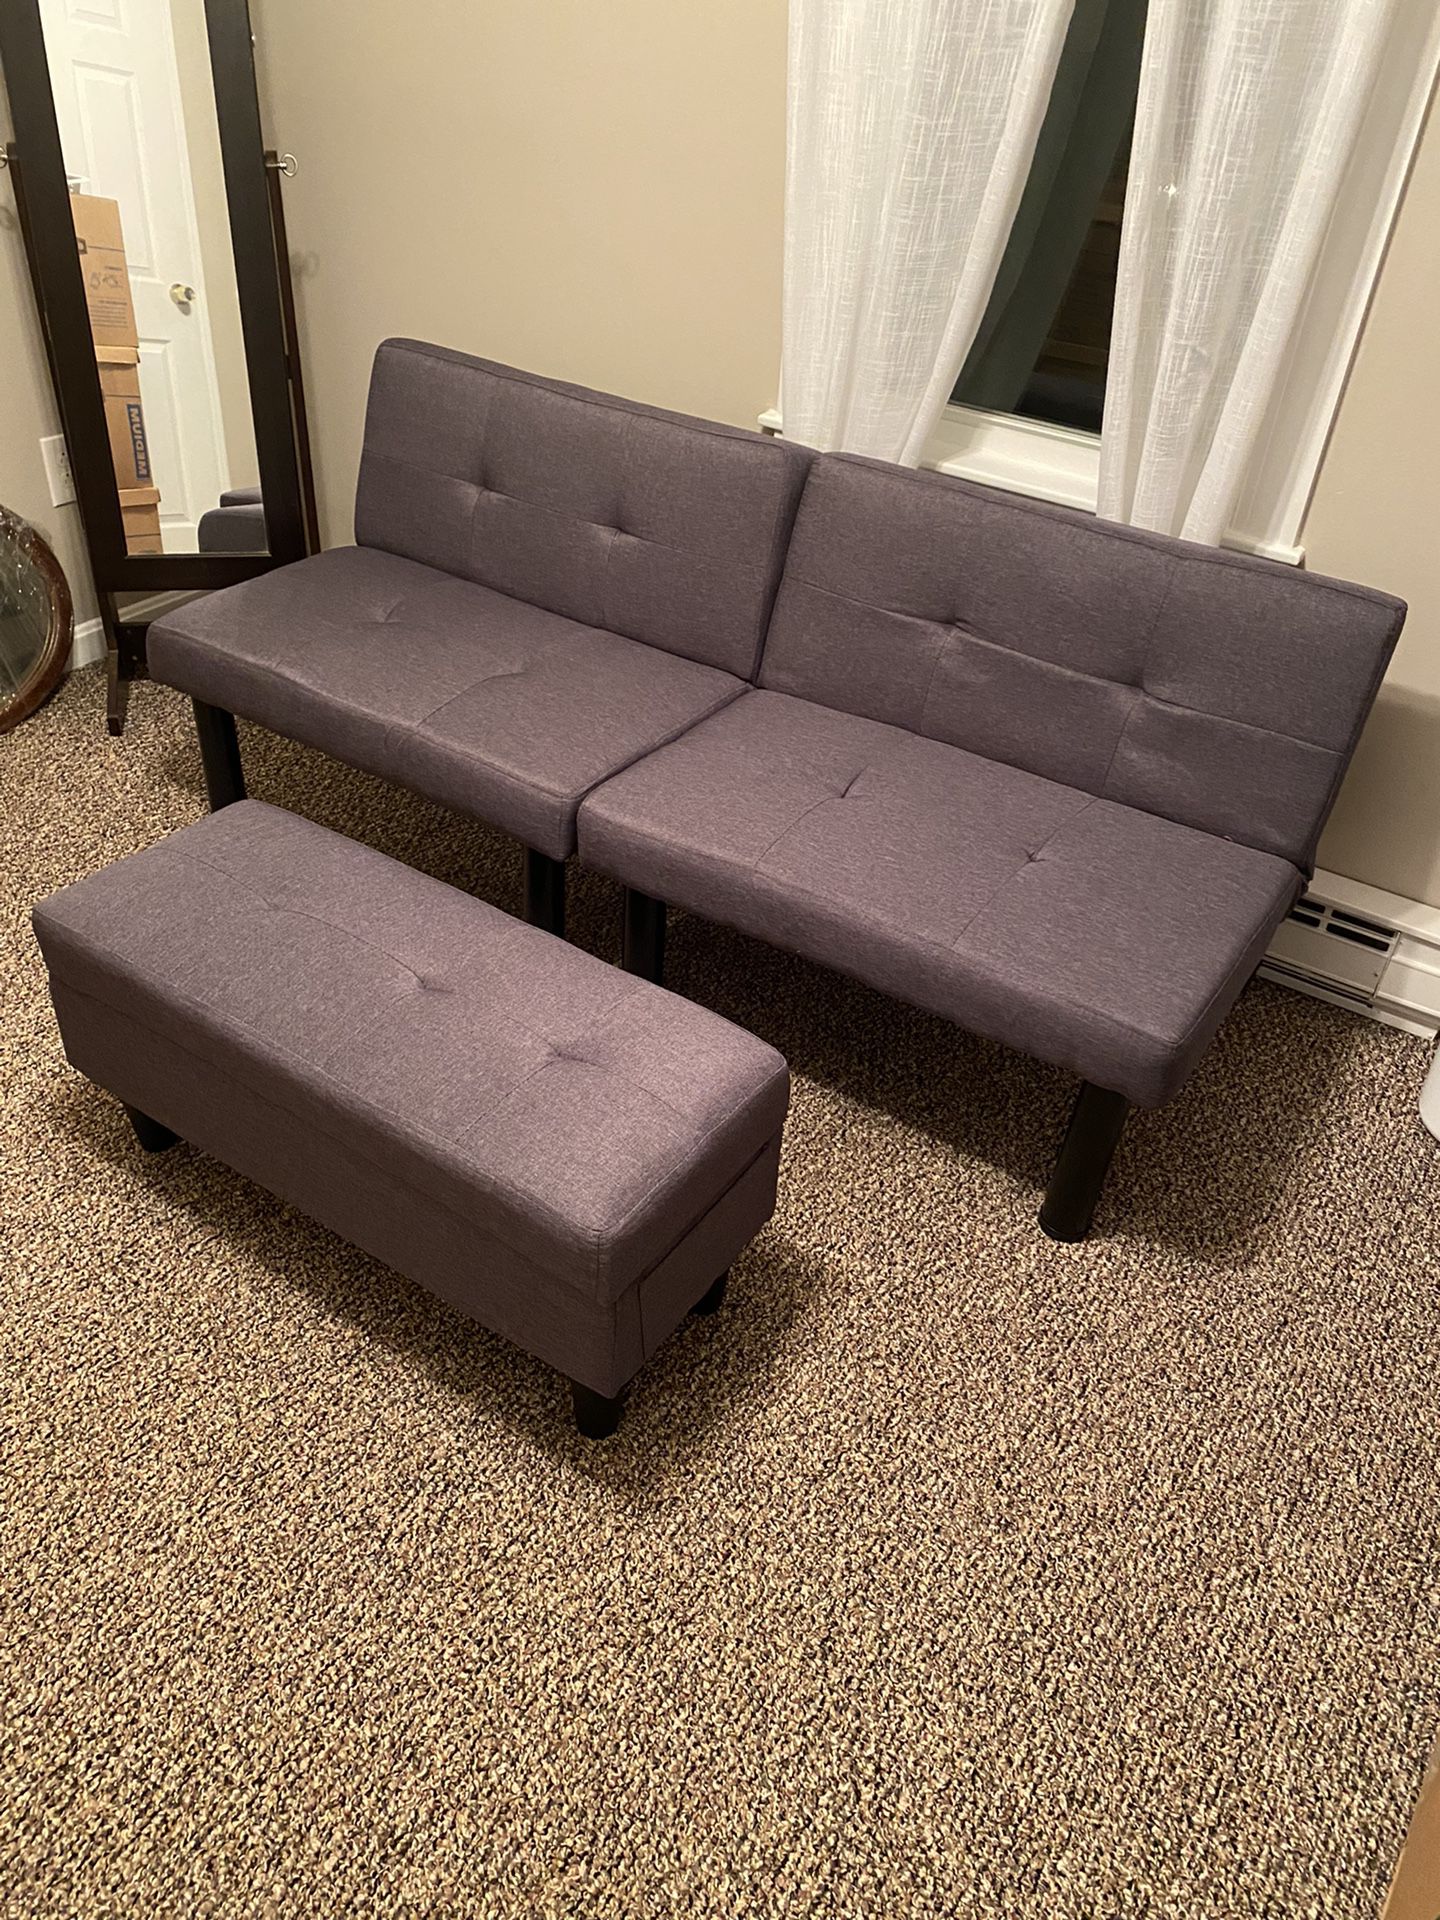 Seating And Futon Set   Brand New.  Assembled But Never Used.  Can Be Used As Shown Or Sofa Separated Into Two Chairs   Paid $210